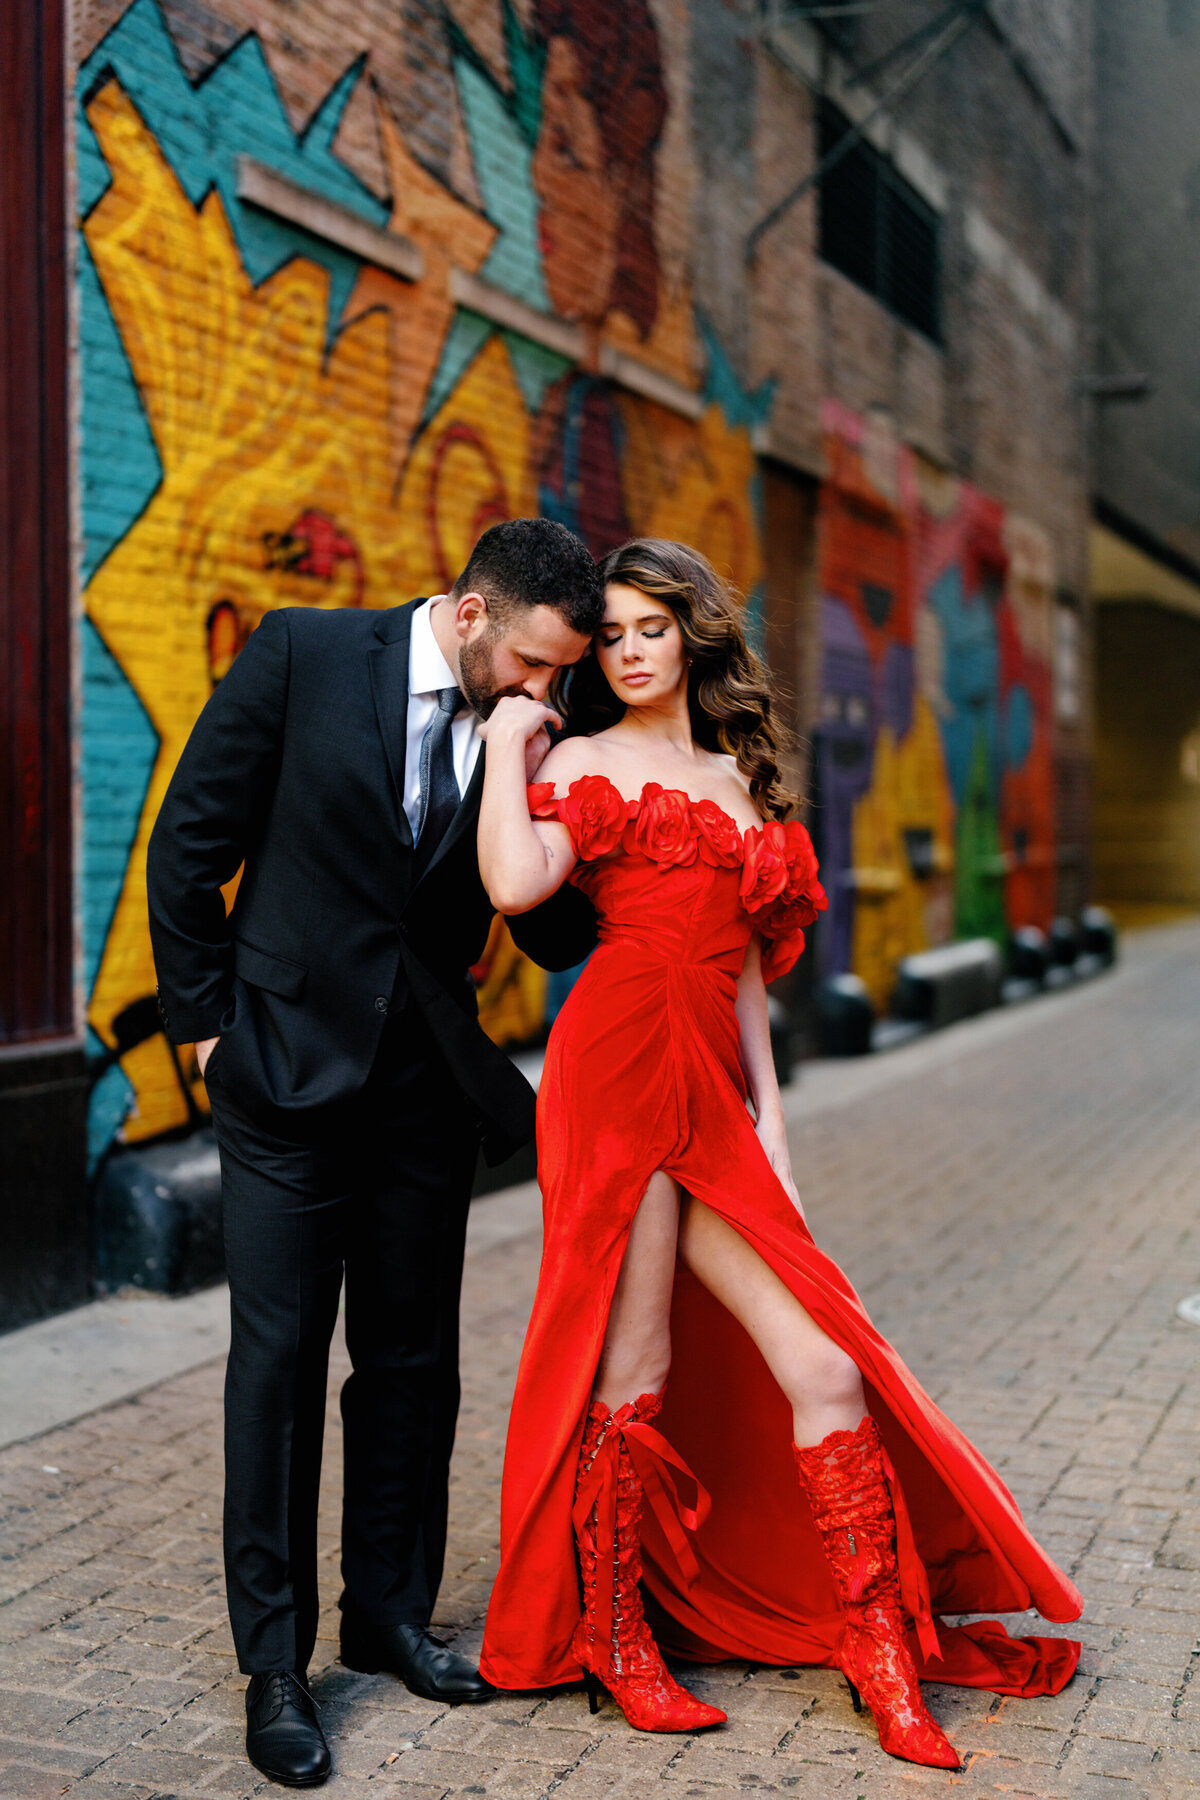 Aspen-Avenue-Chicago-Wedding-Photographer-Union-Station-Chicago-Theater-Engagement-Session-Timeless-Romantic-Red-Dress-Editorial-Stemming-From-Love-Bry-Jean-Artistry-The-Bridal-Collective-True-to-color-Luxury-FAV-109